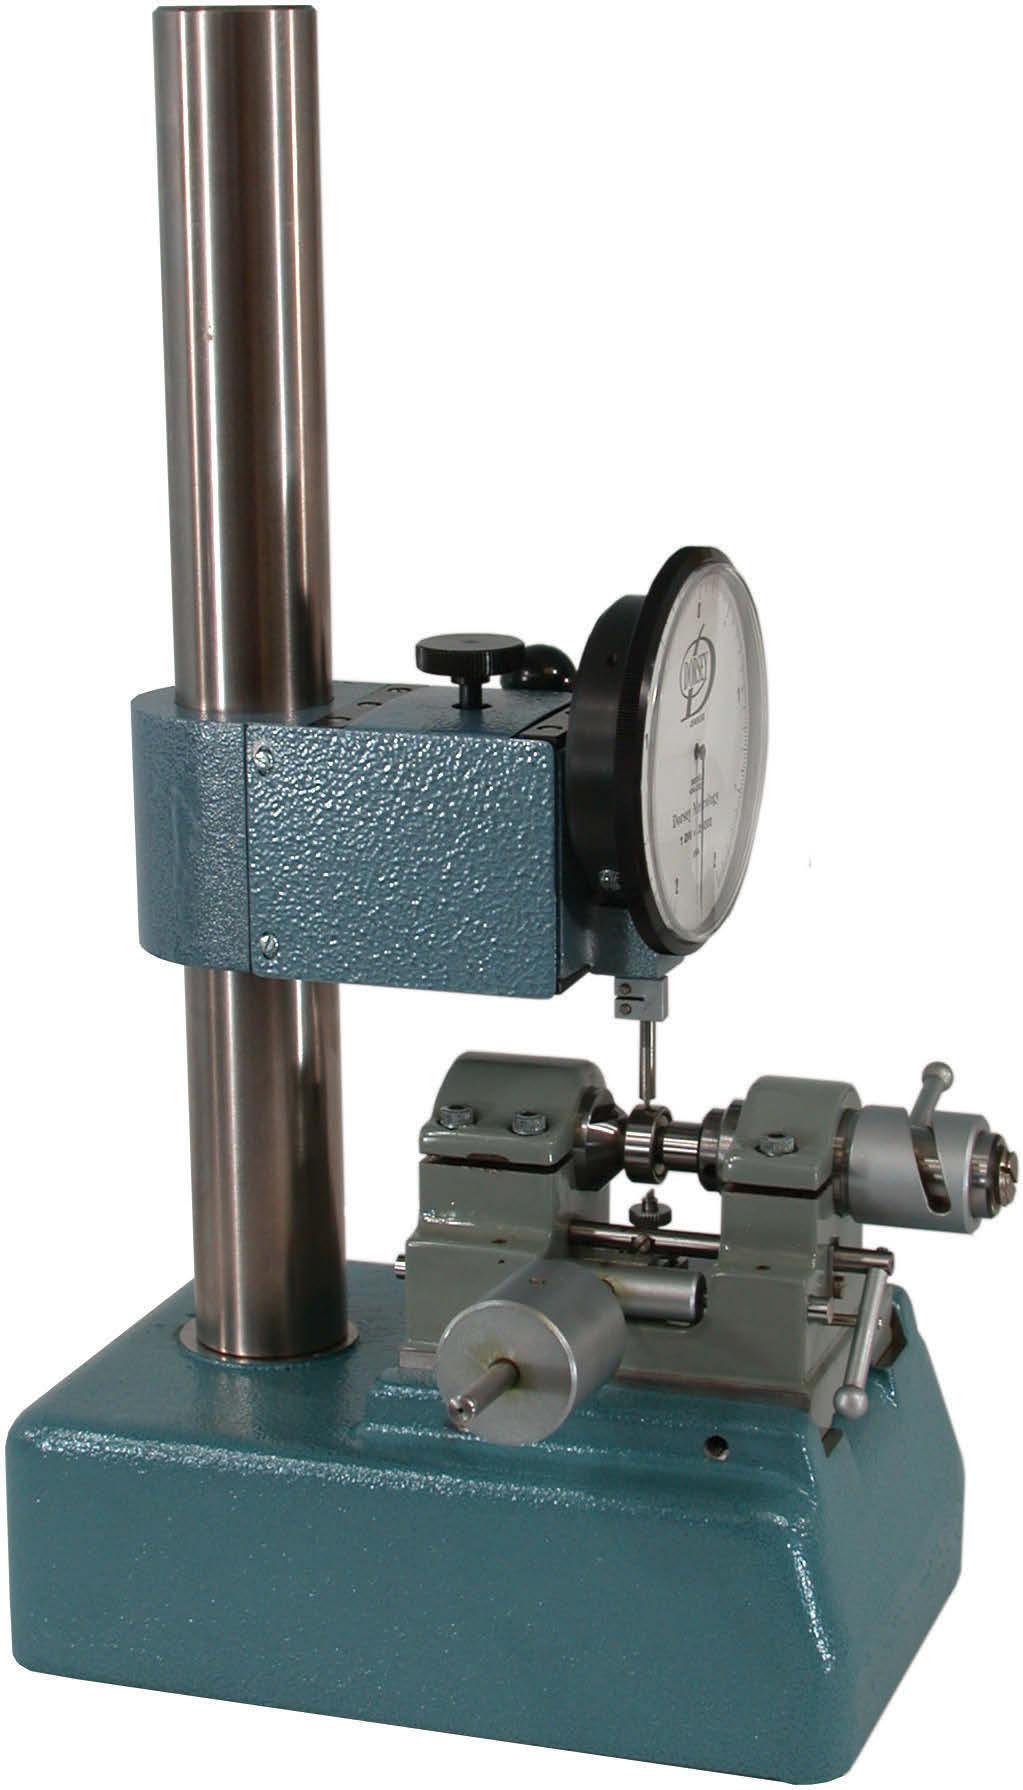 Bearing Radial Play Gage The S-3 comparator stand anvil can be replaced with a radial play fixture and accessories to check the internal clearance of miniature bearings.